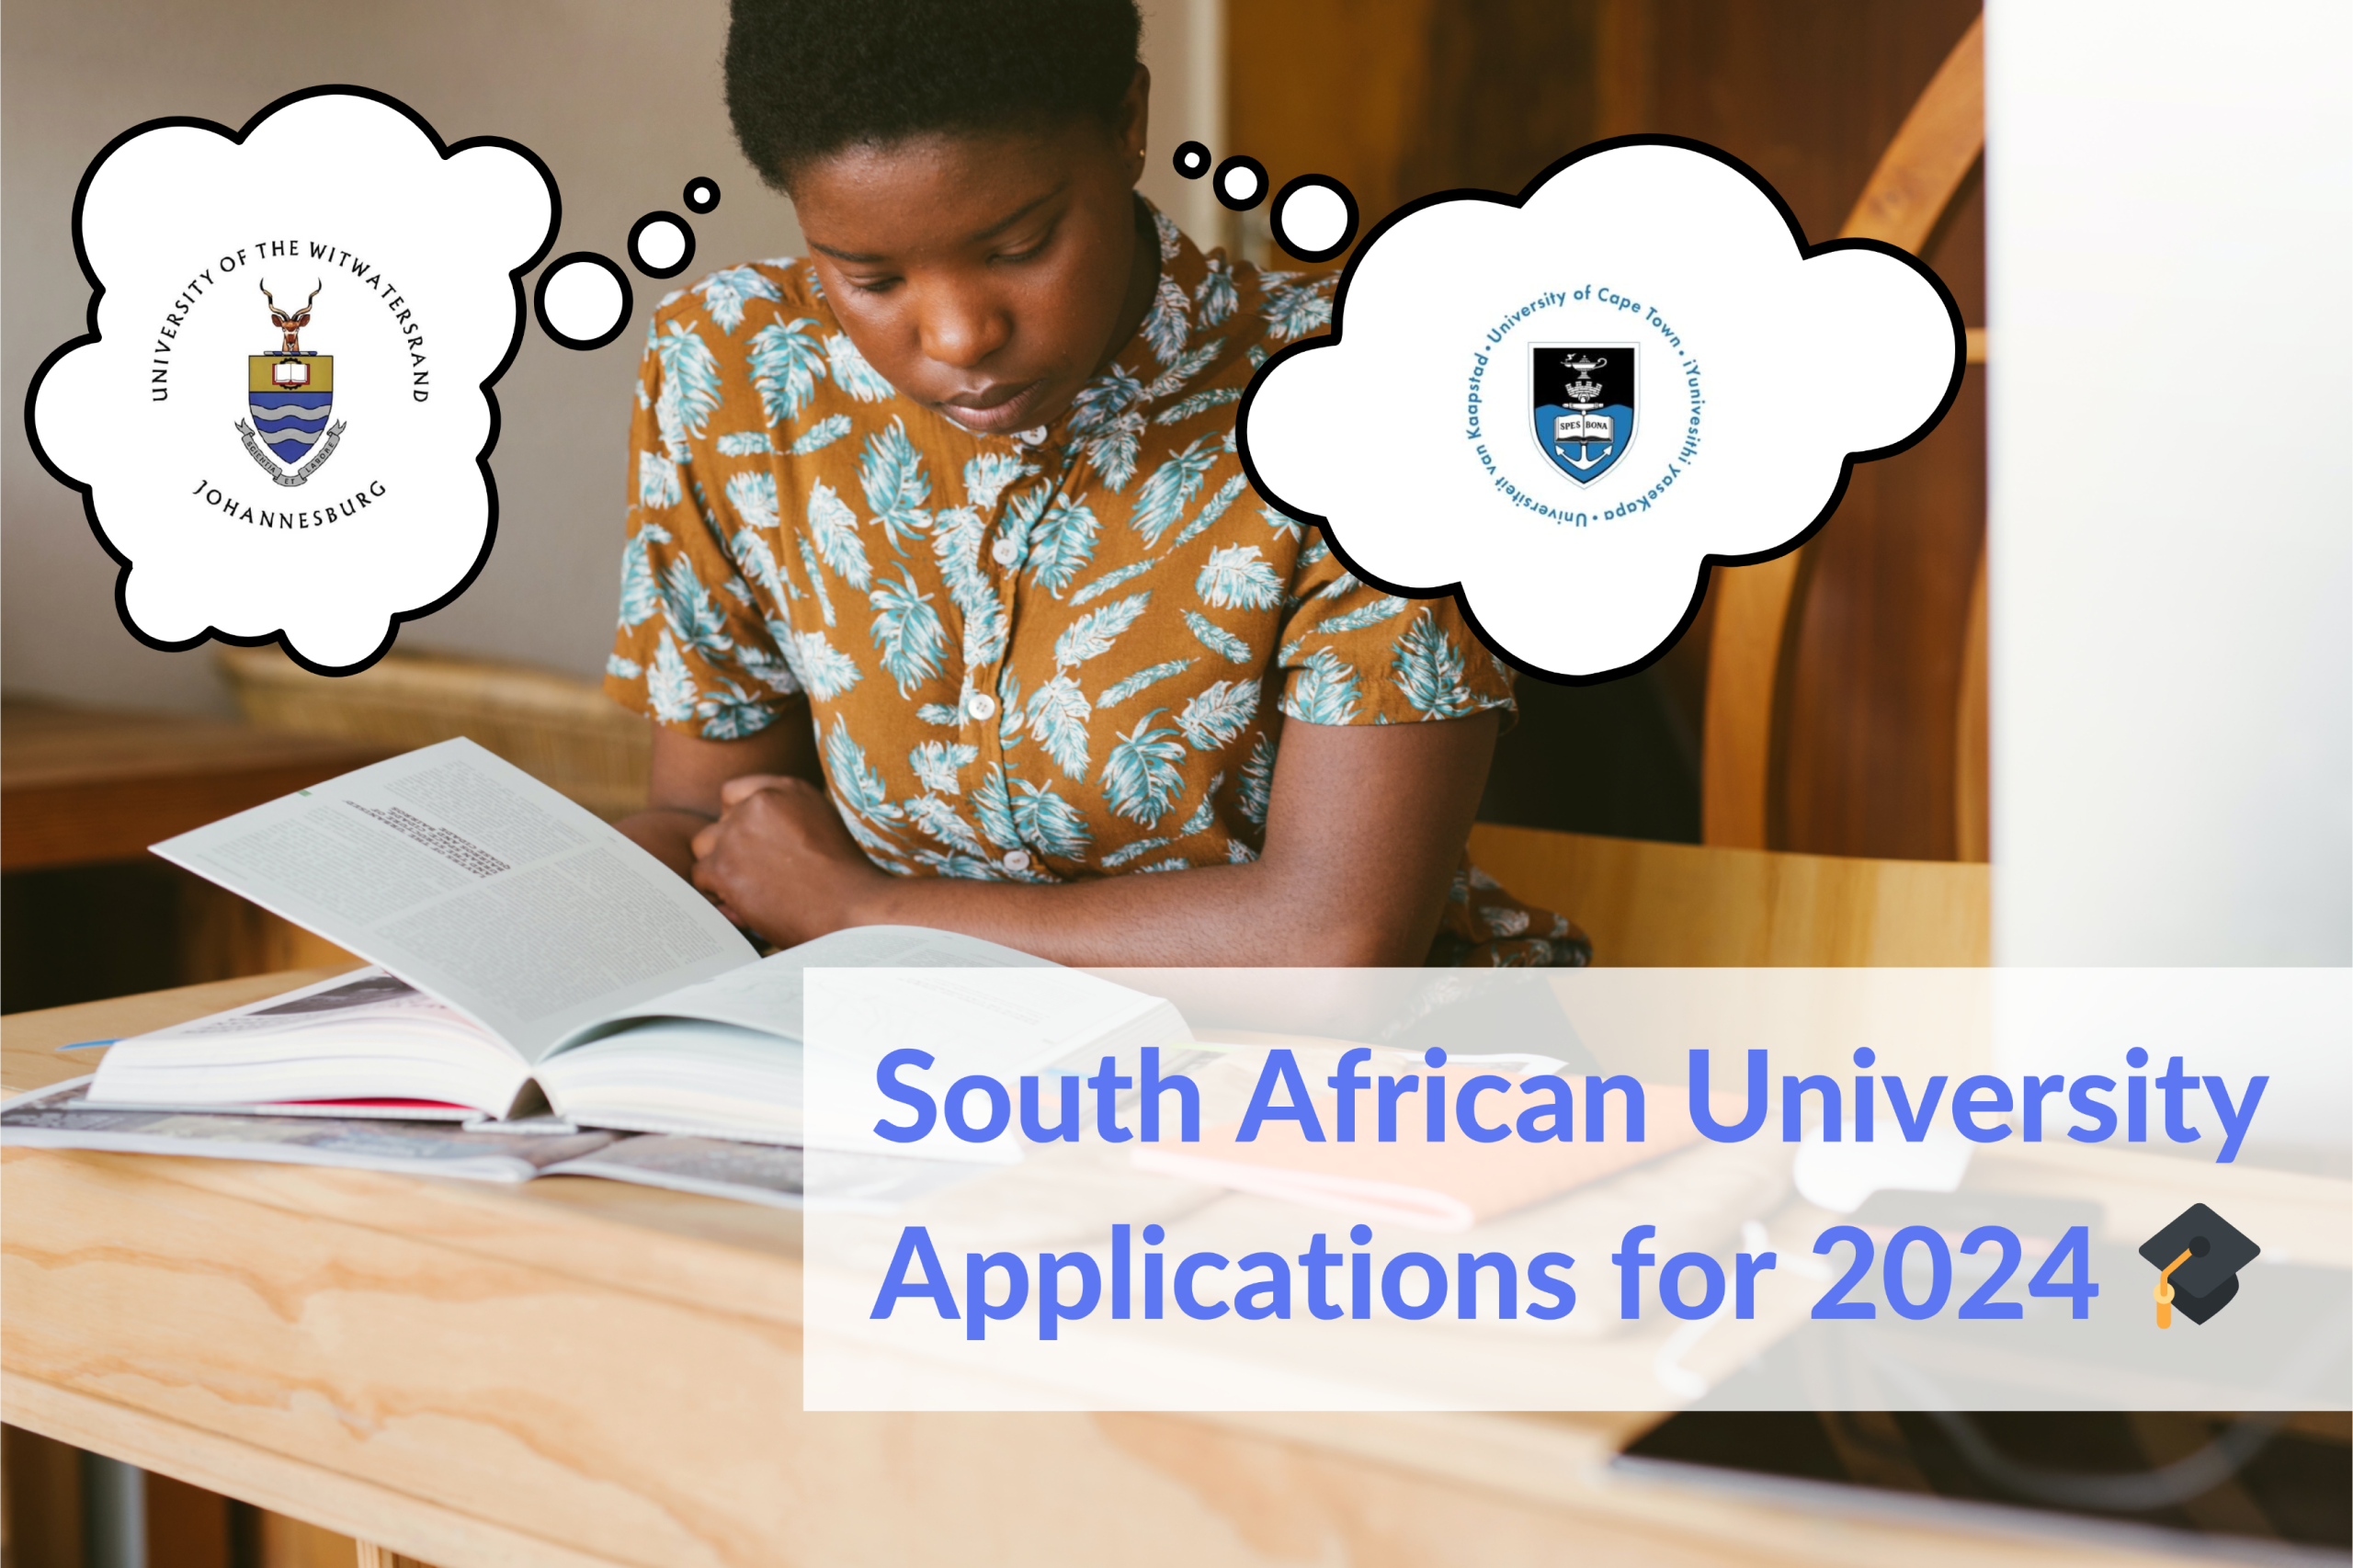 South African universities with no application fee